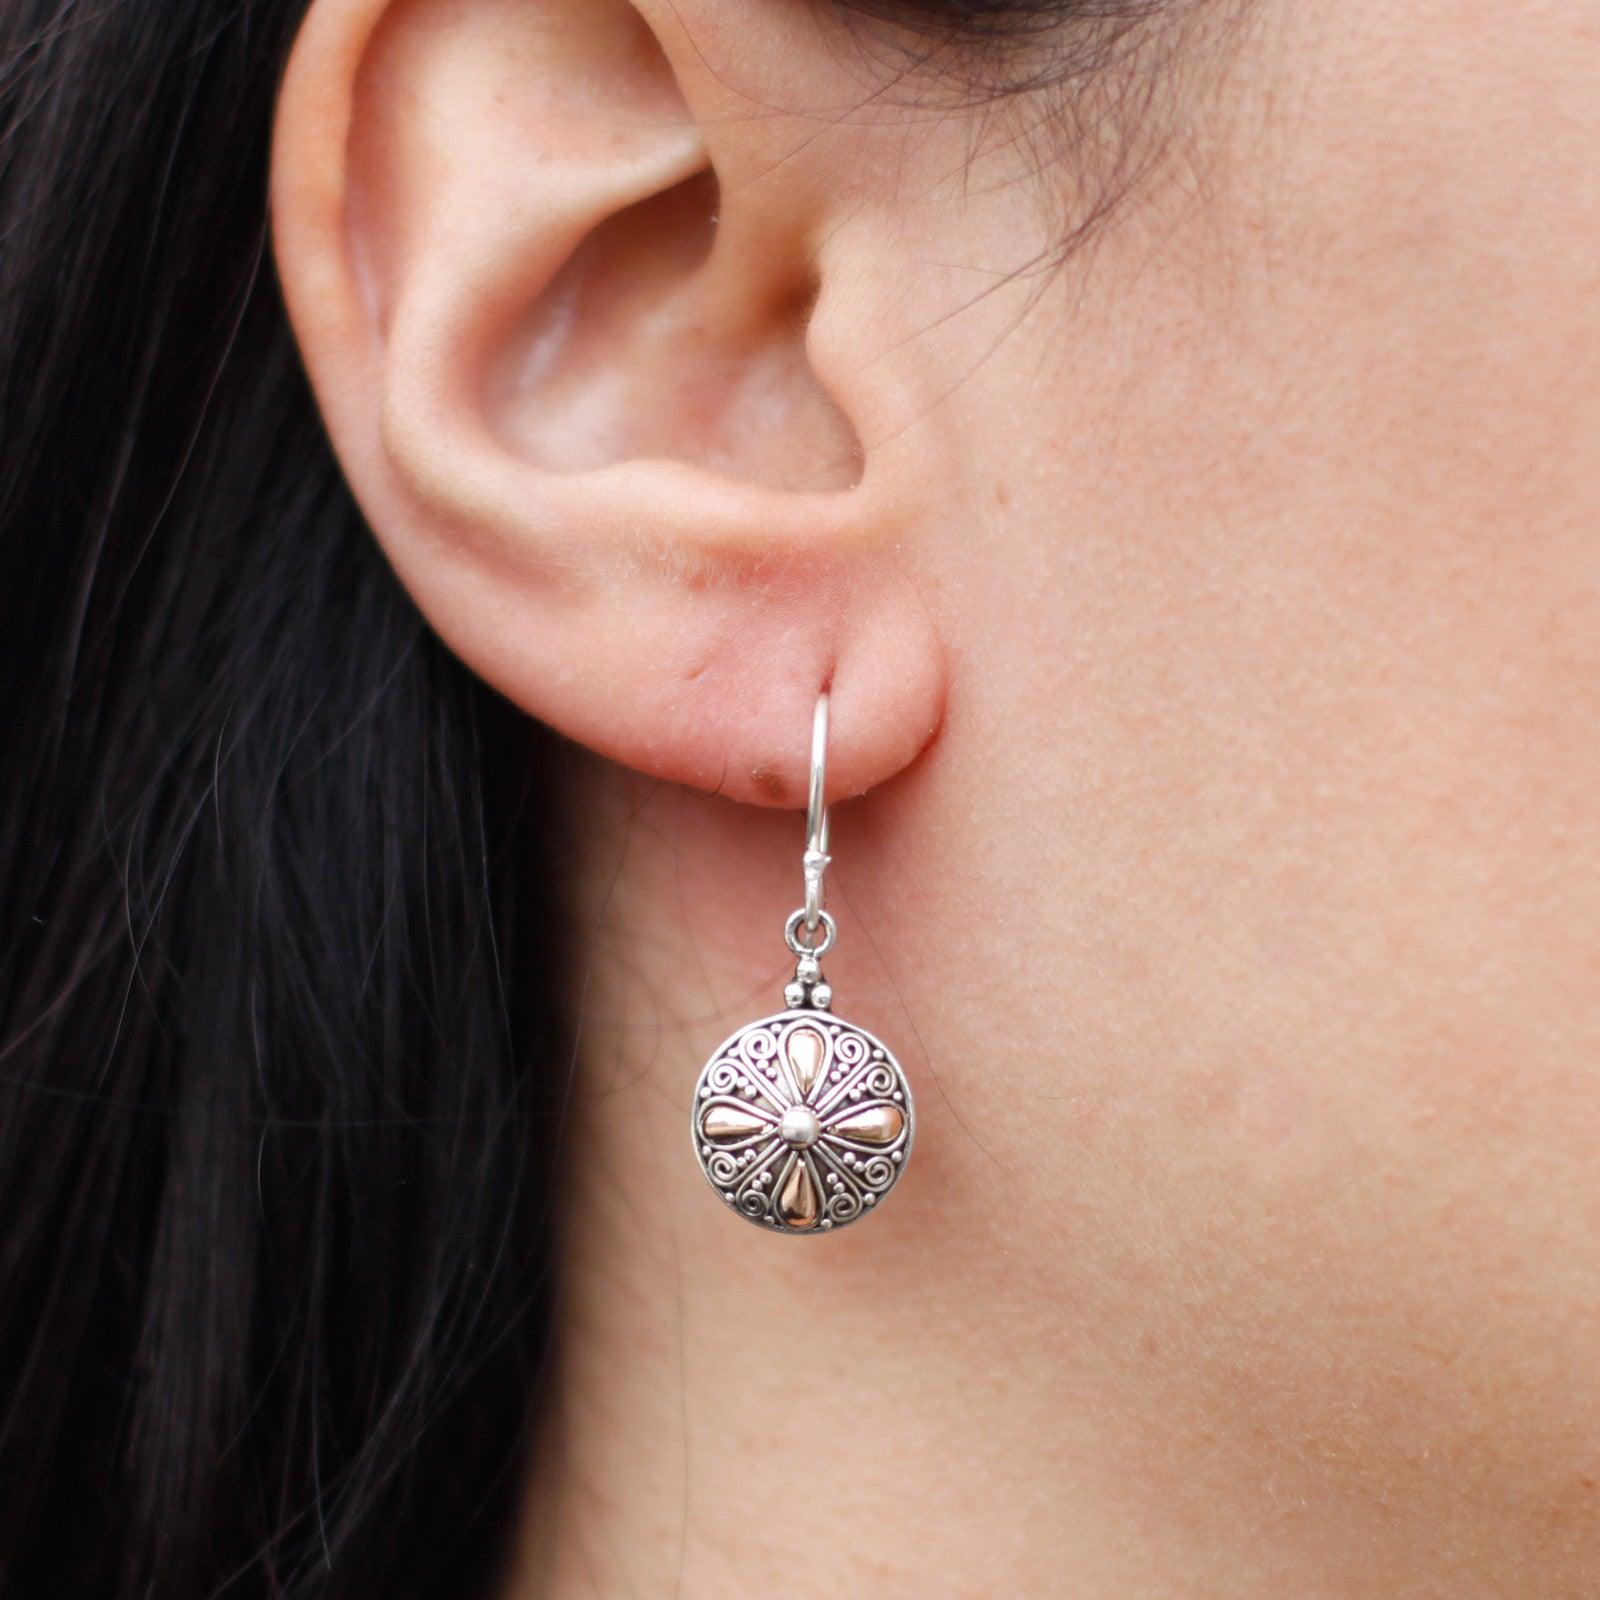 Handmade Bali Jewellery Silver & Gold Earring - Classic Round - DuvetDay.co.uk